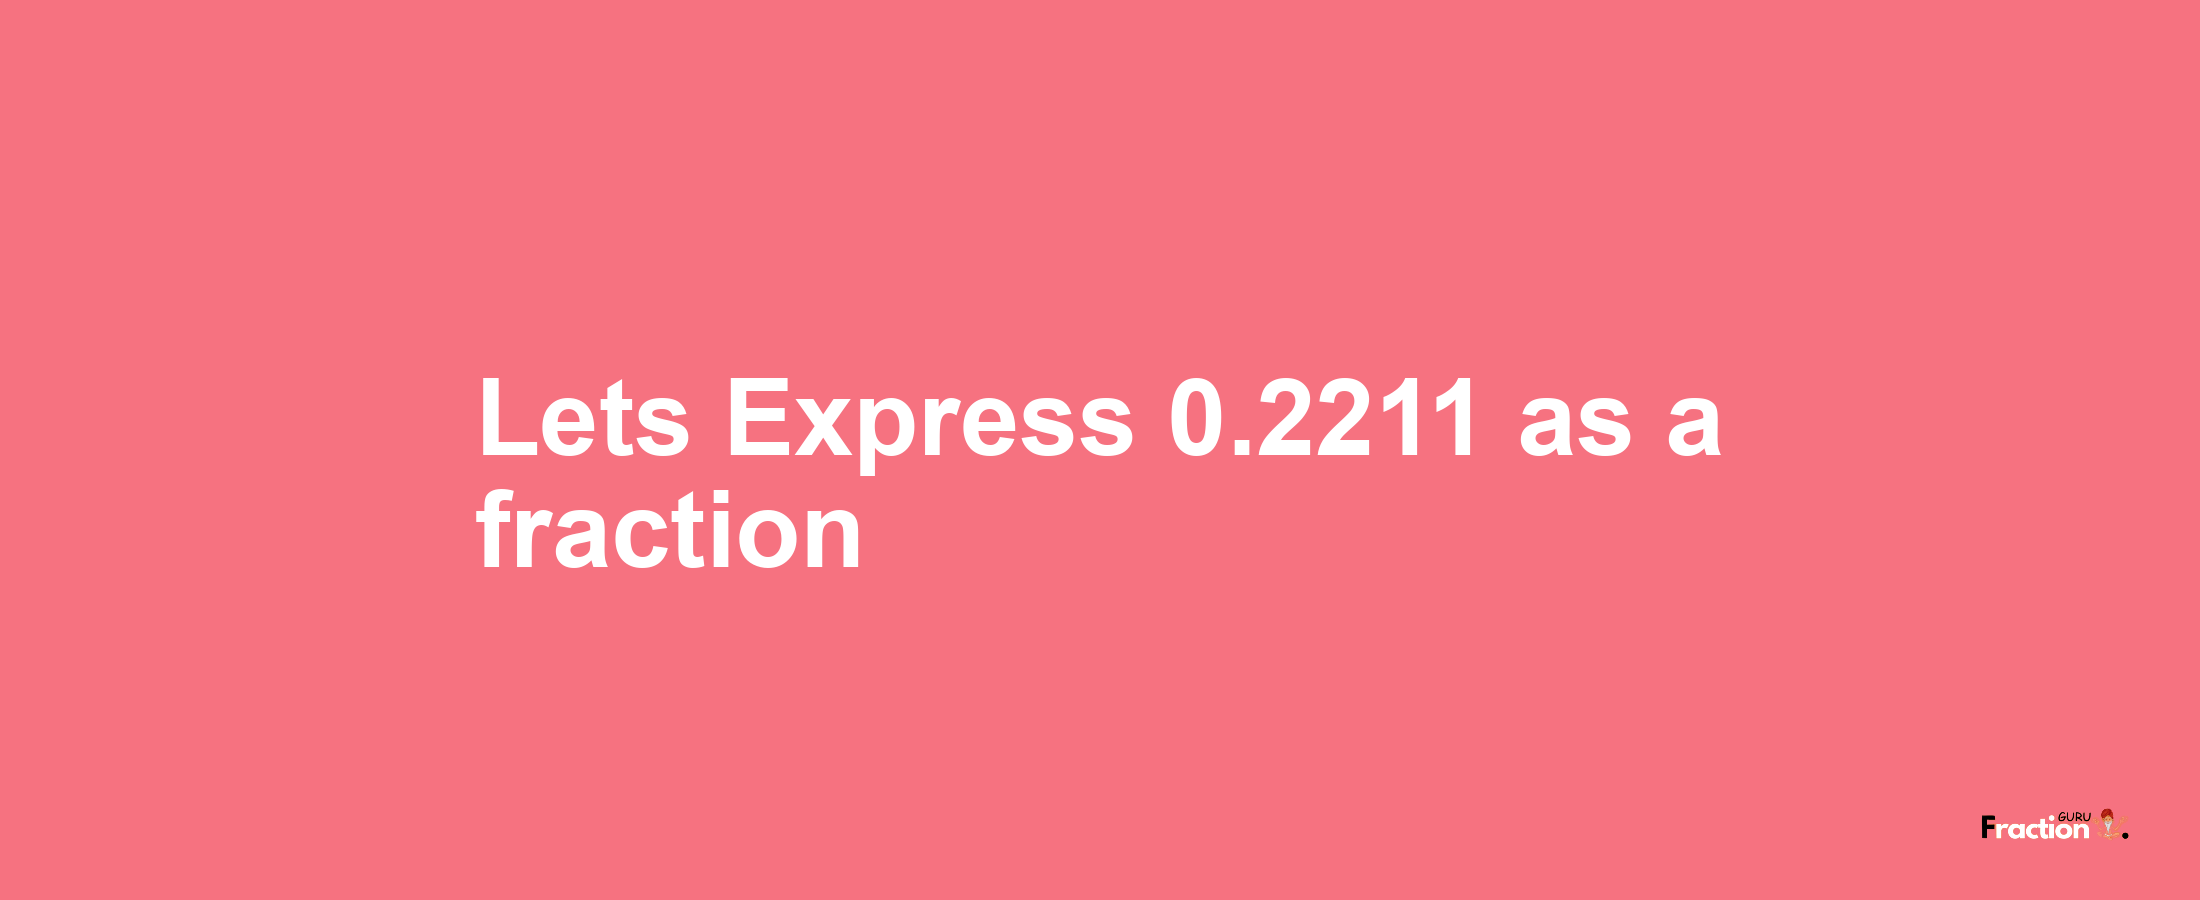 Lets Express 0.2211 as afraction